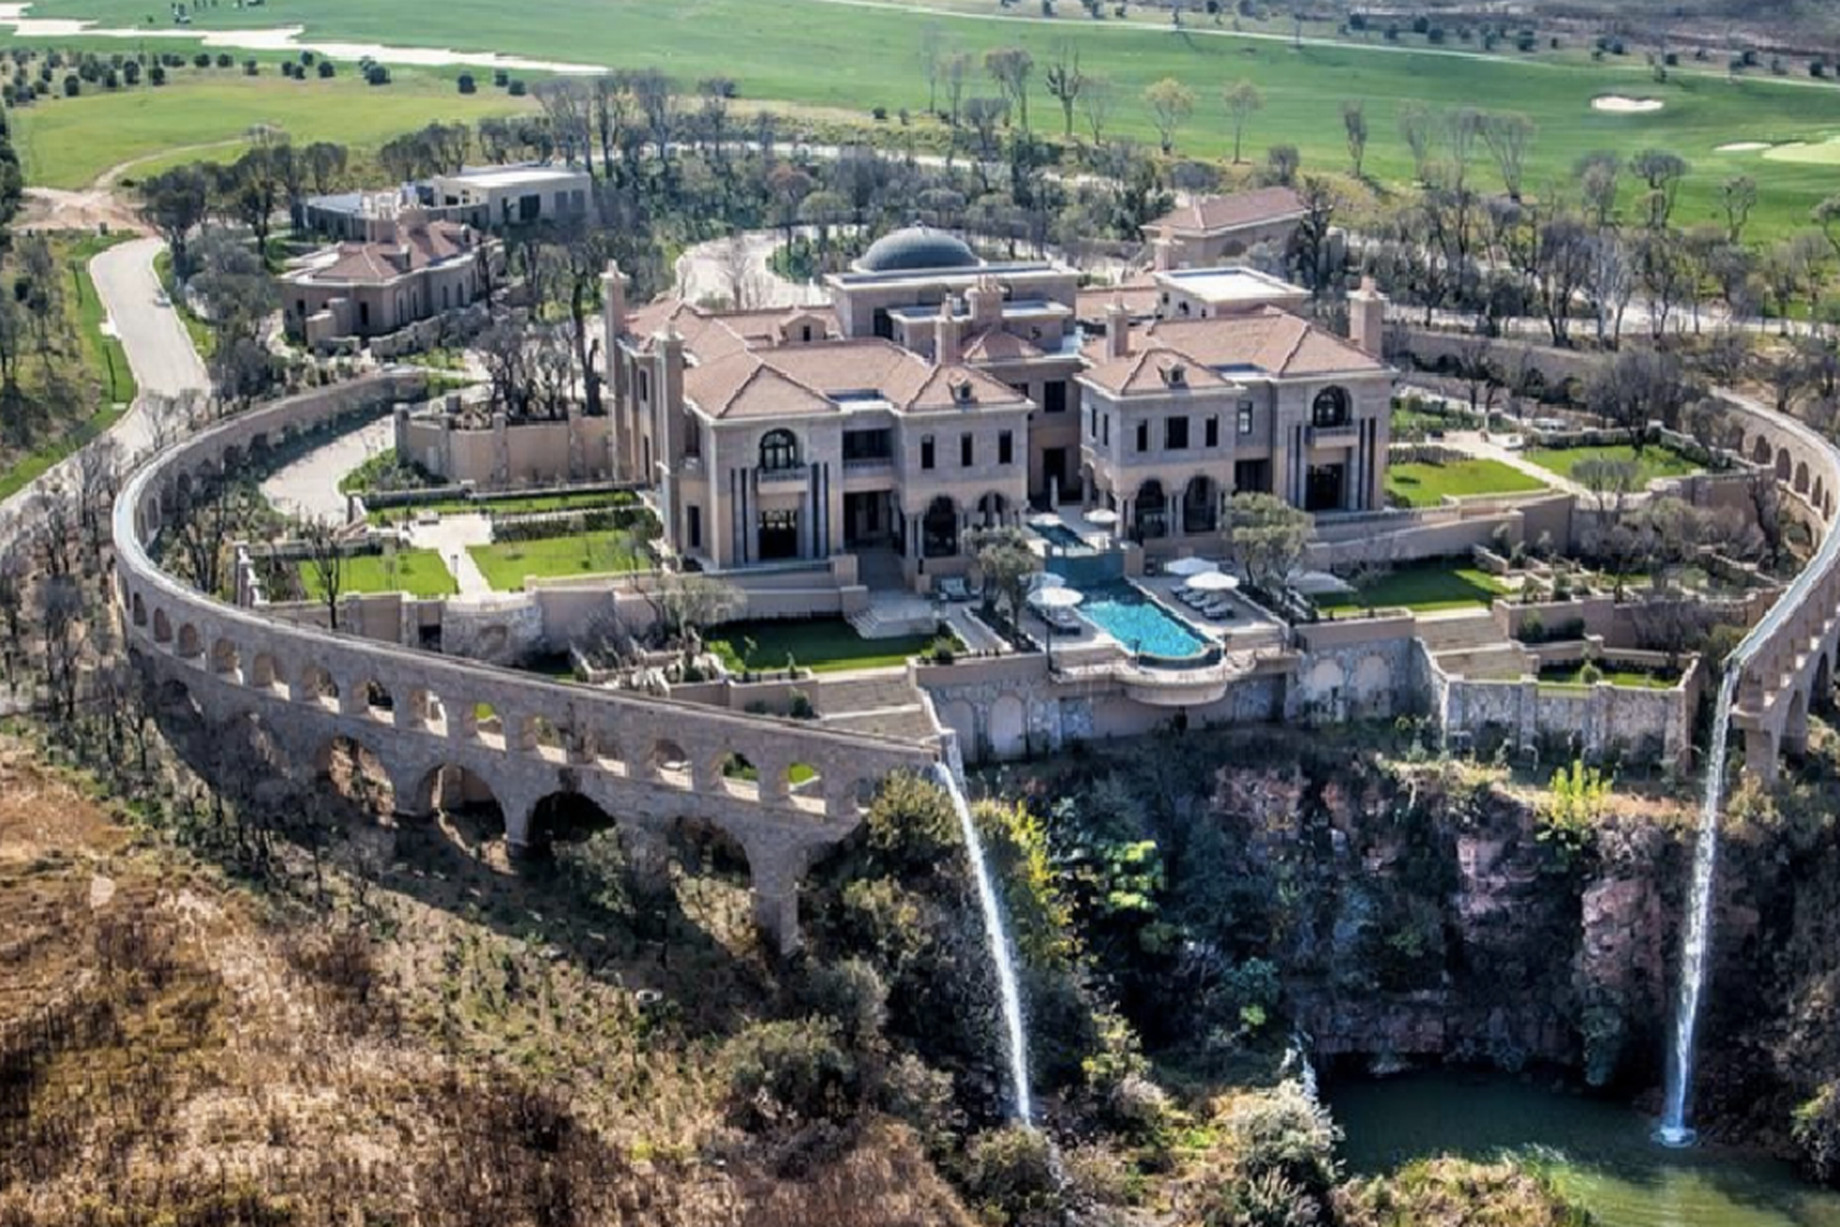 biggest-house-in-the-world-awesome-palazzo-steyn-south-africa-s-most-expensive-amp-lavish-mega-mansion-of-biggest-house-in-the-world.png